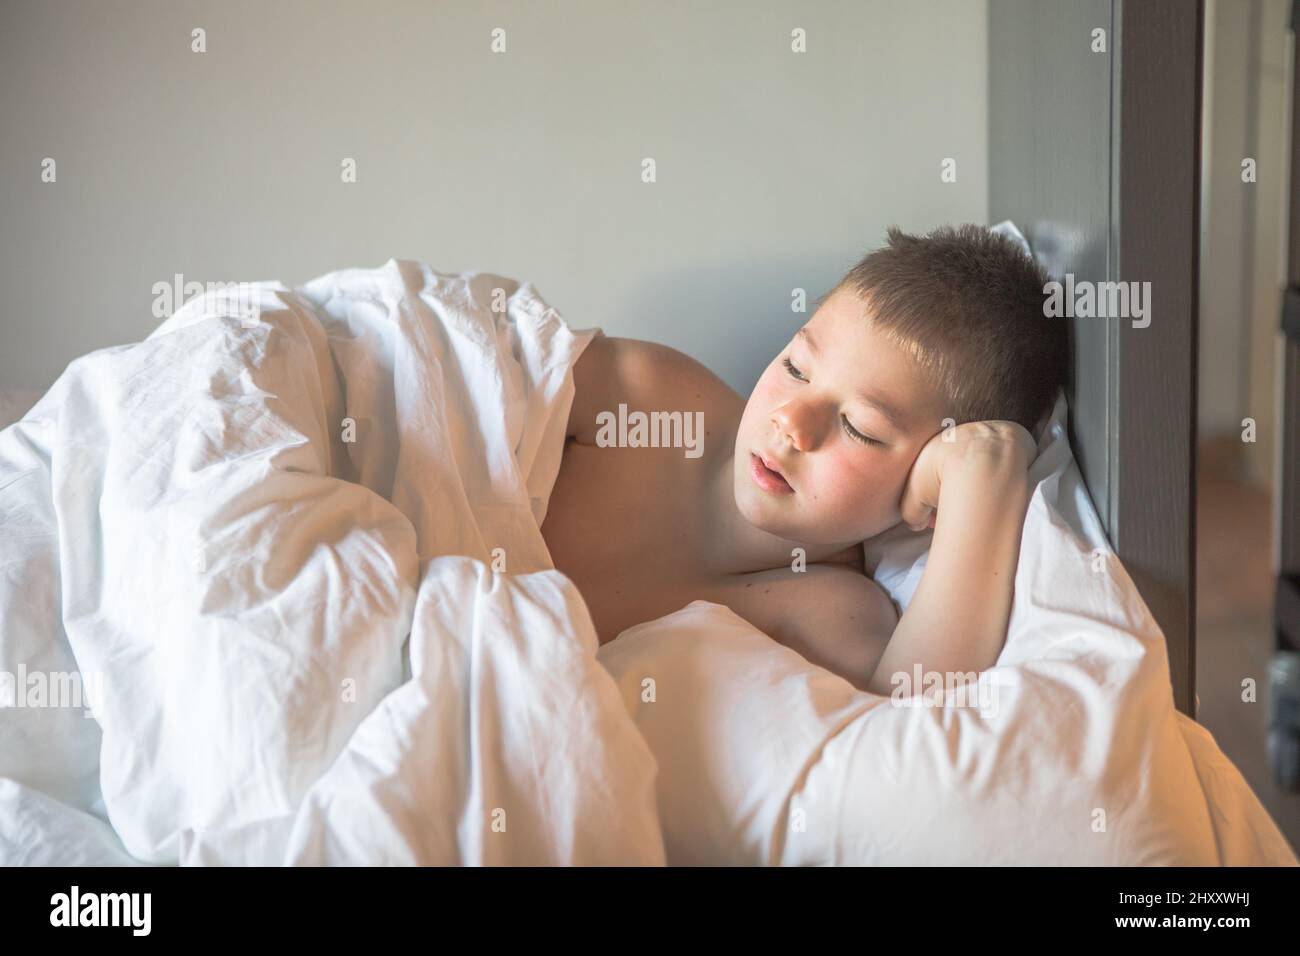 Kid 7 year old lying on bed, Sleepy child waking up the morning in his bed room with morning light, sad boy lies on a bed in the room Stock Photo